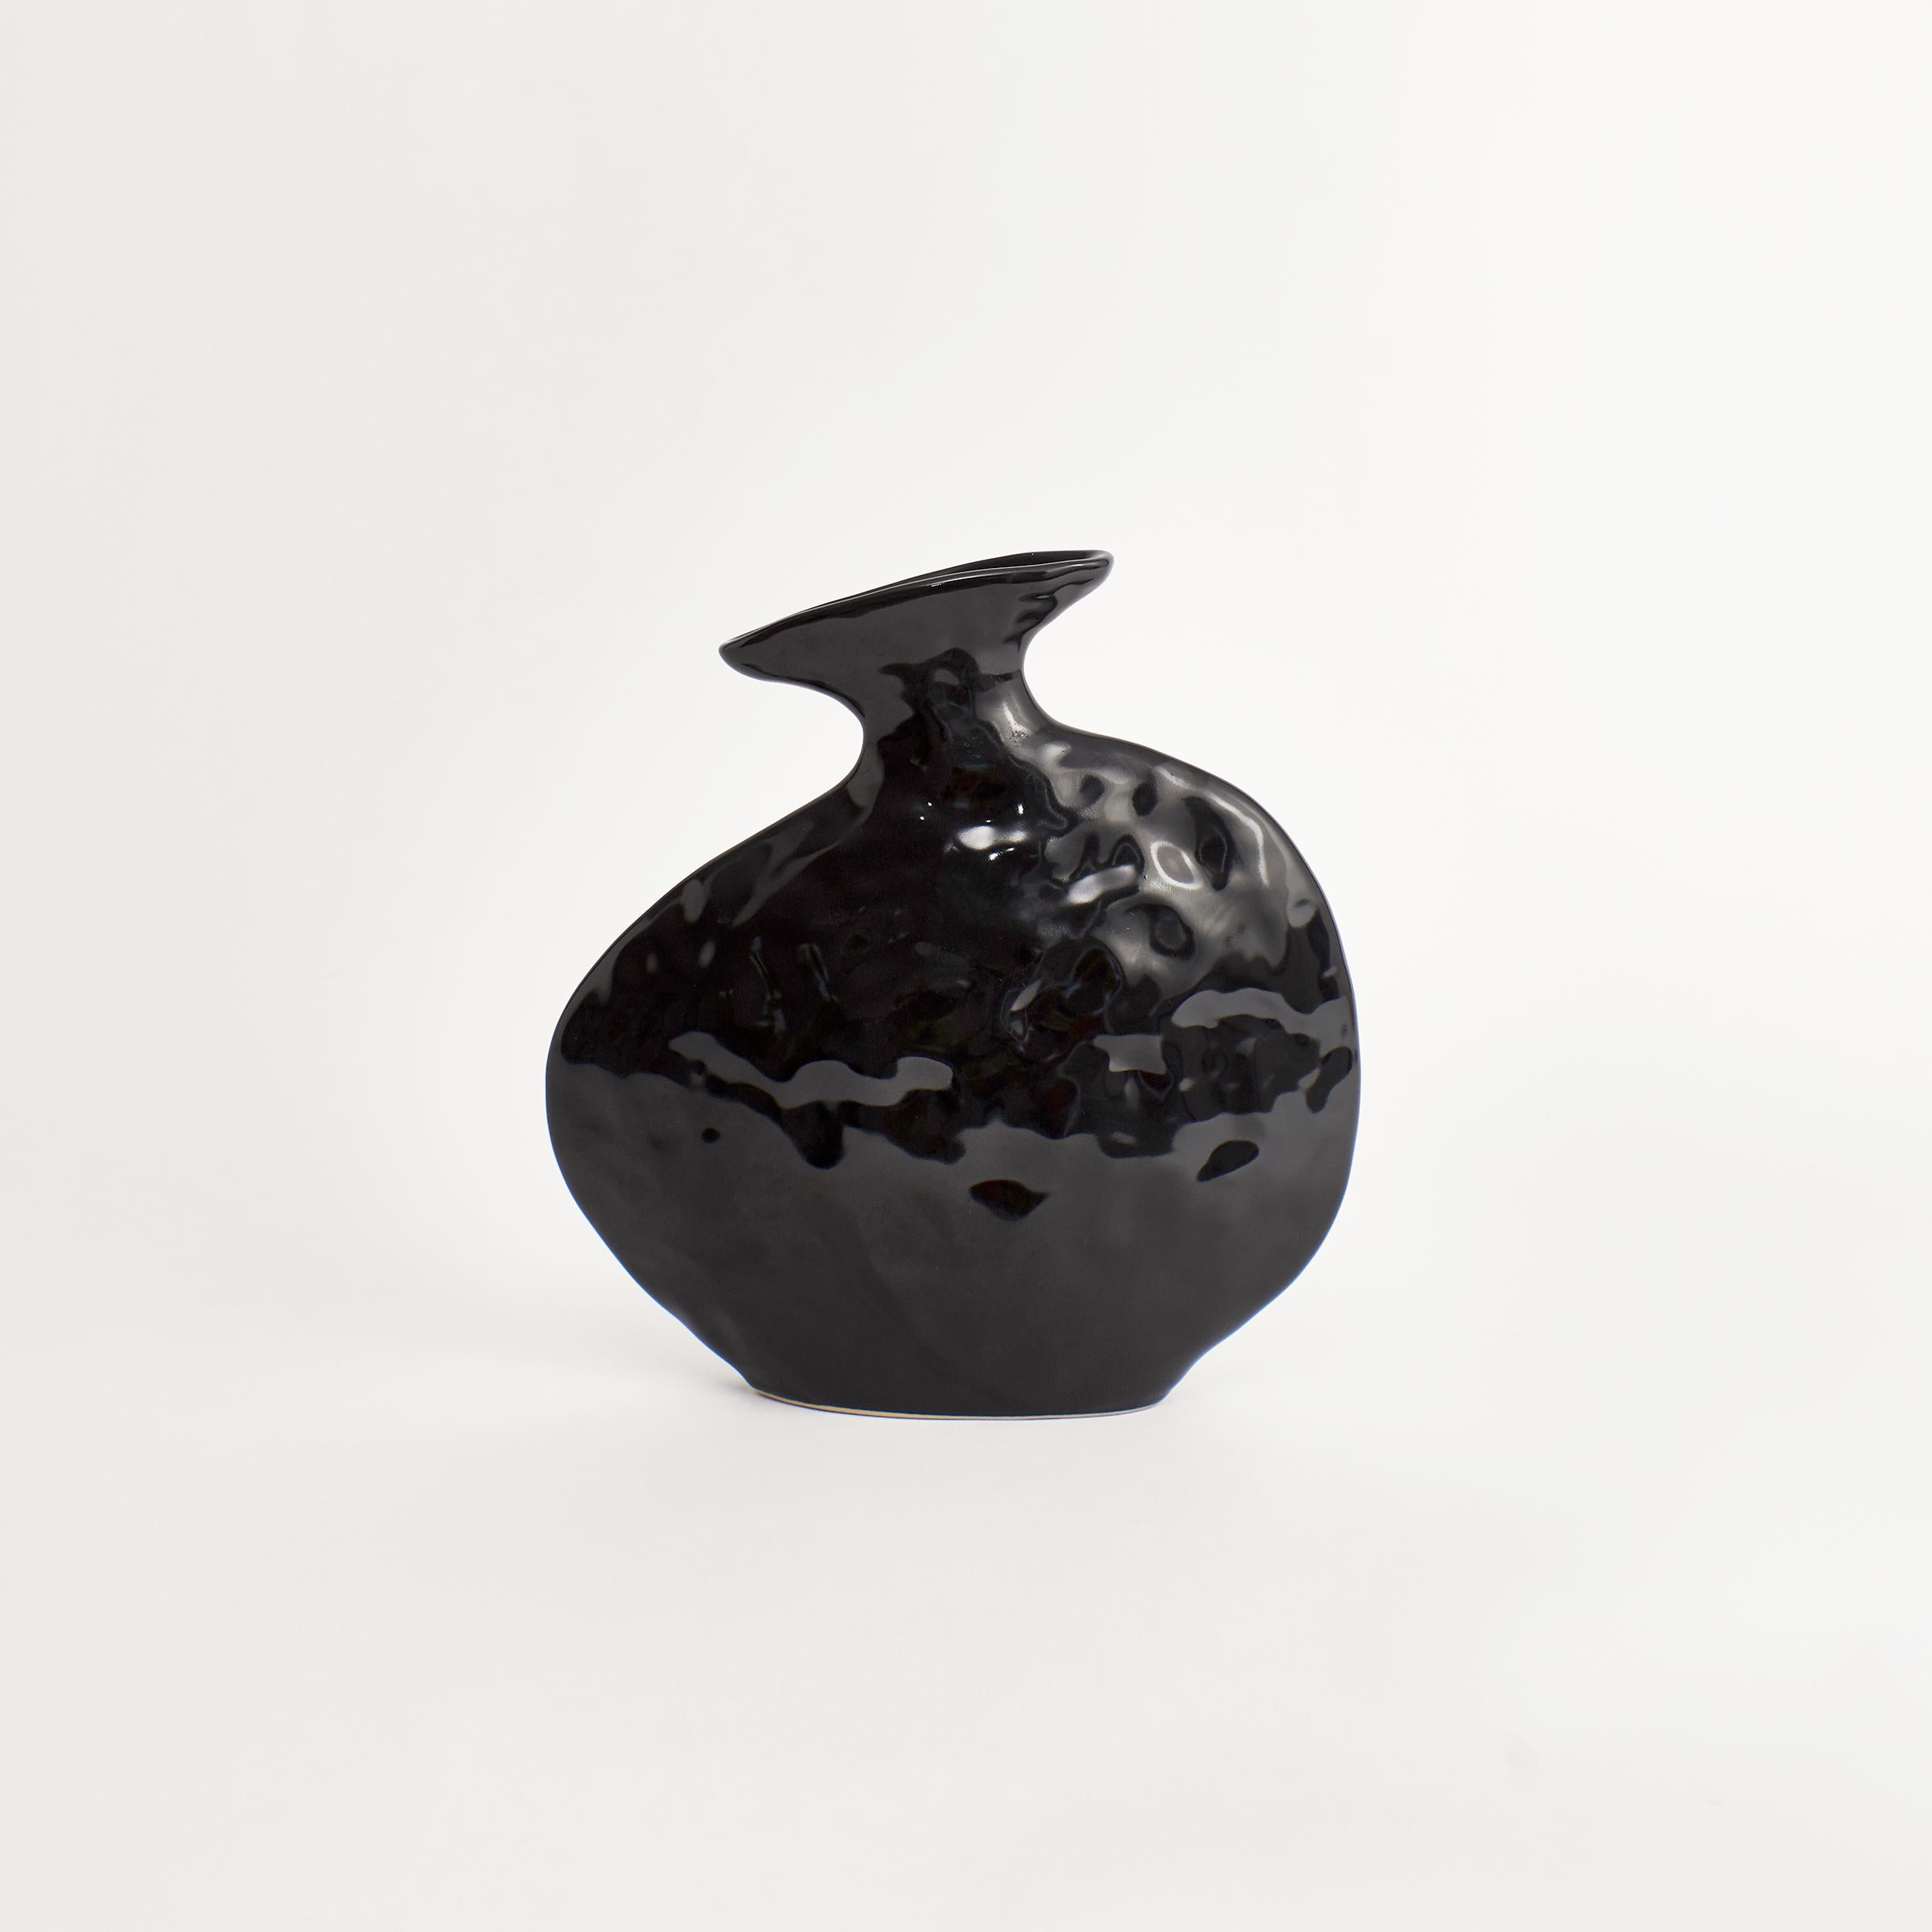 Flat vase in Shiny Black.
Designed by Project 213A in 2021.
Handmade Stoneware.


Creation demands destruction, taking the old and the typical to conceive the new and particular. The Flat Vase represents the essence of this idiosyncrasy through its